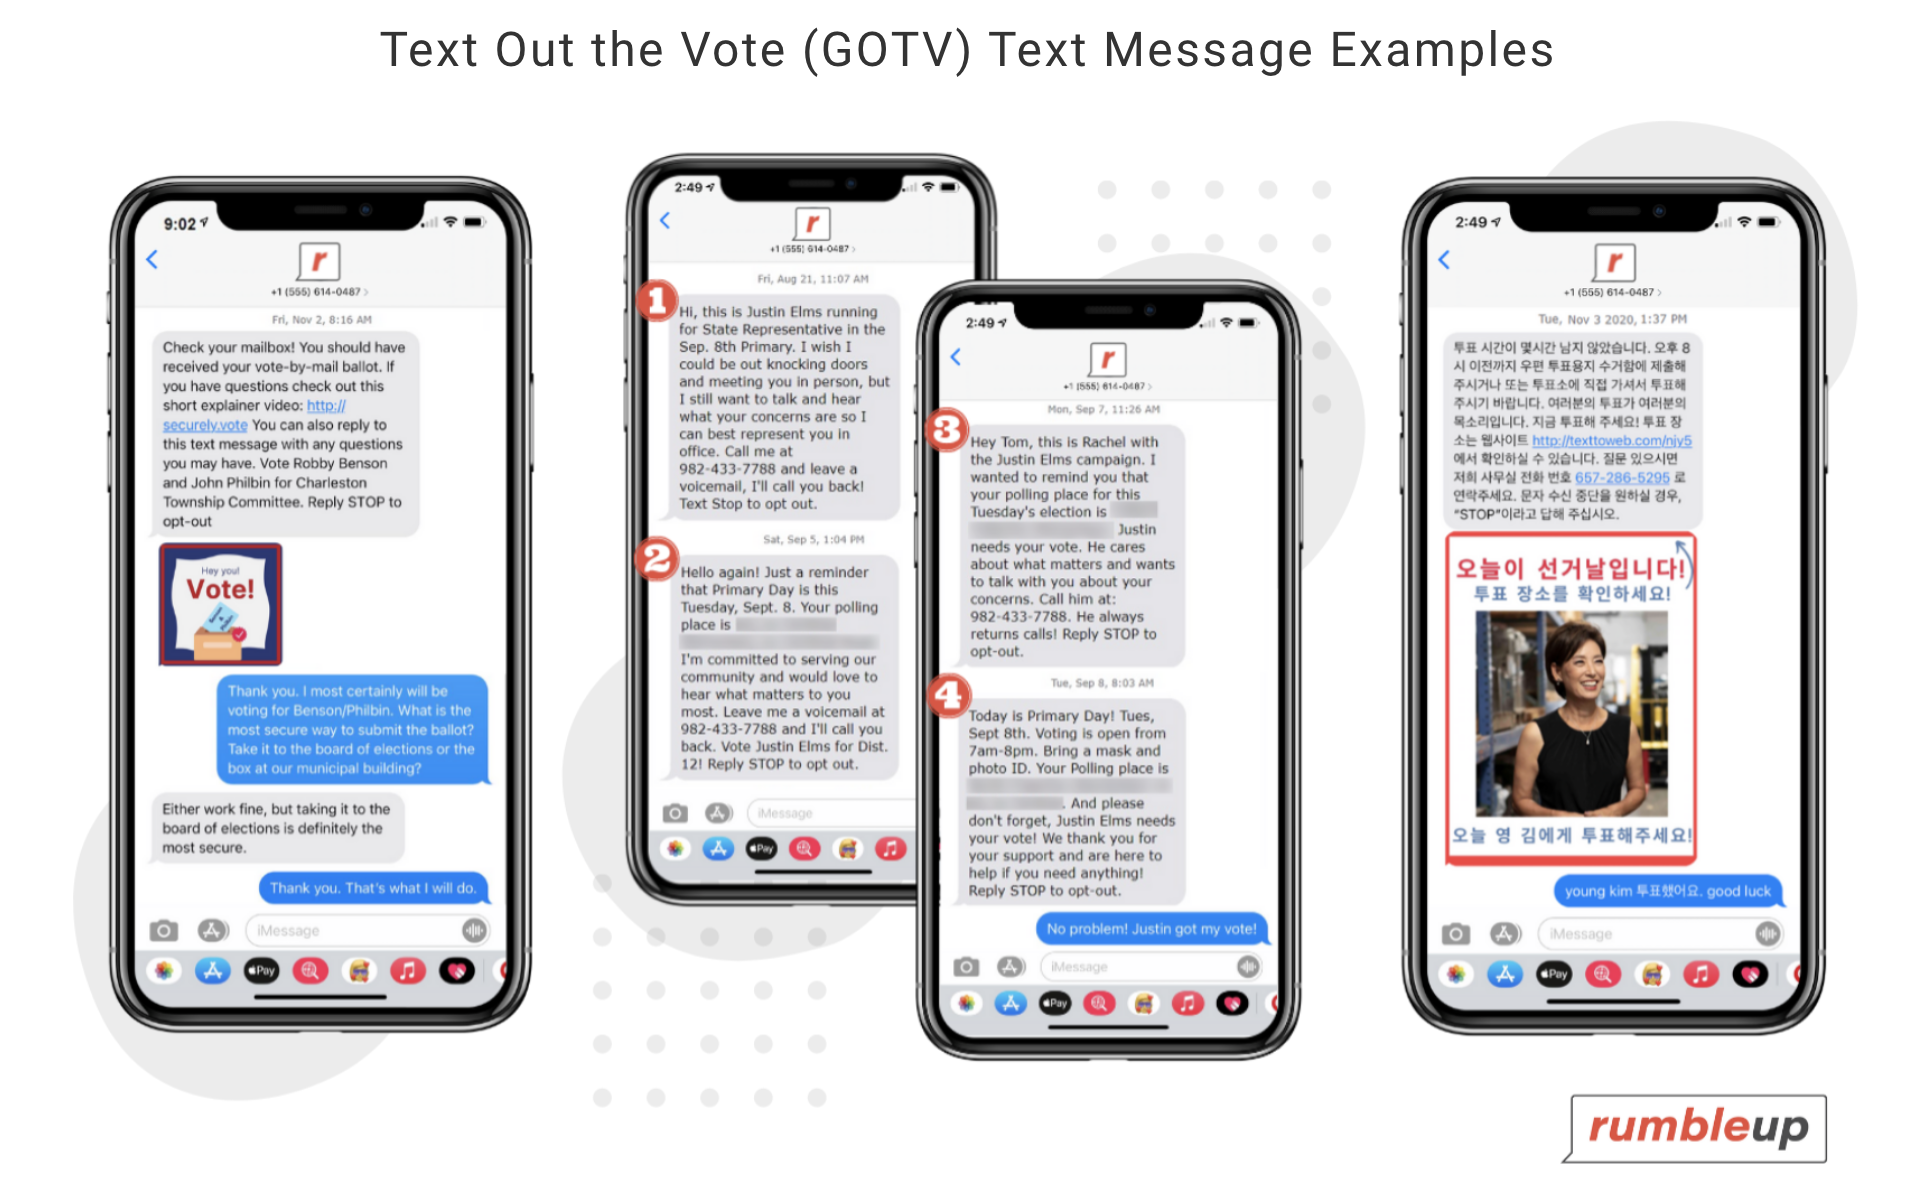 Real GOTV Text Message Examples